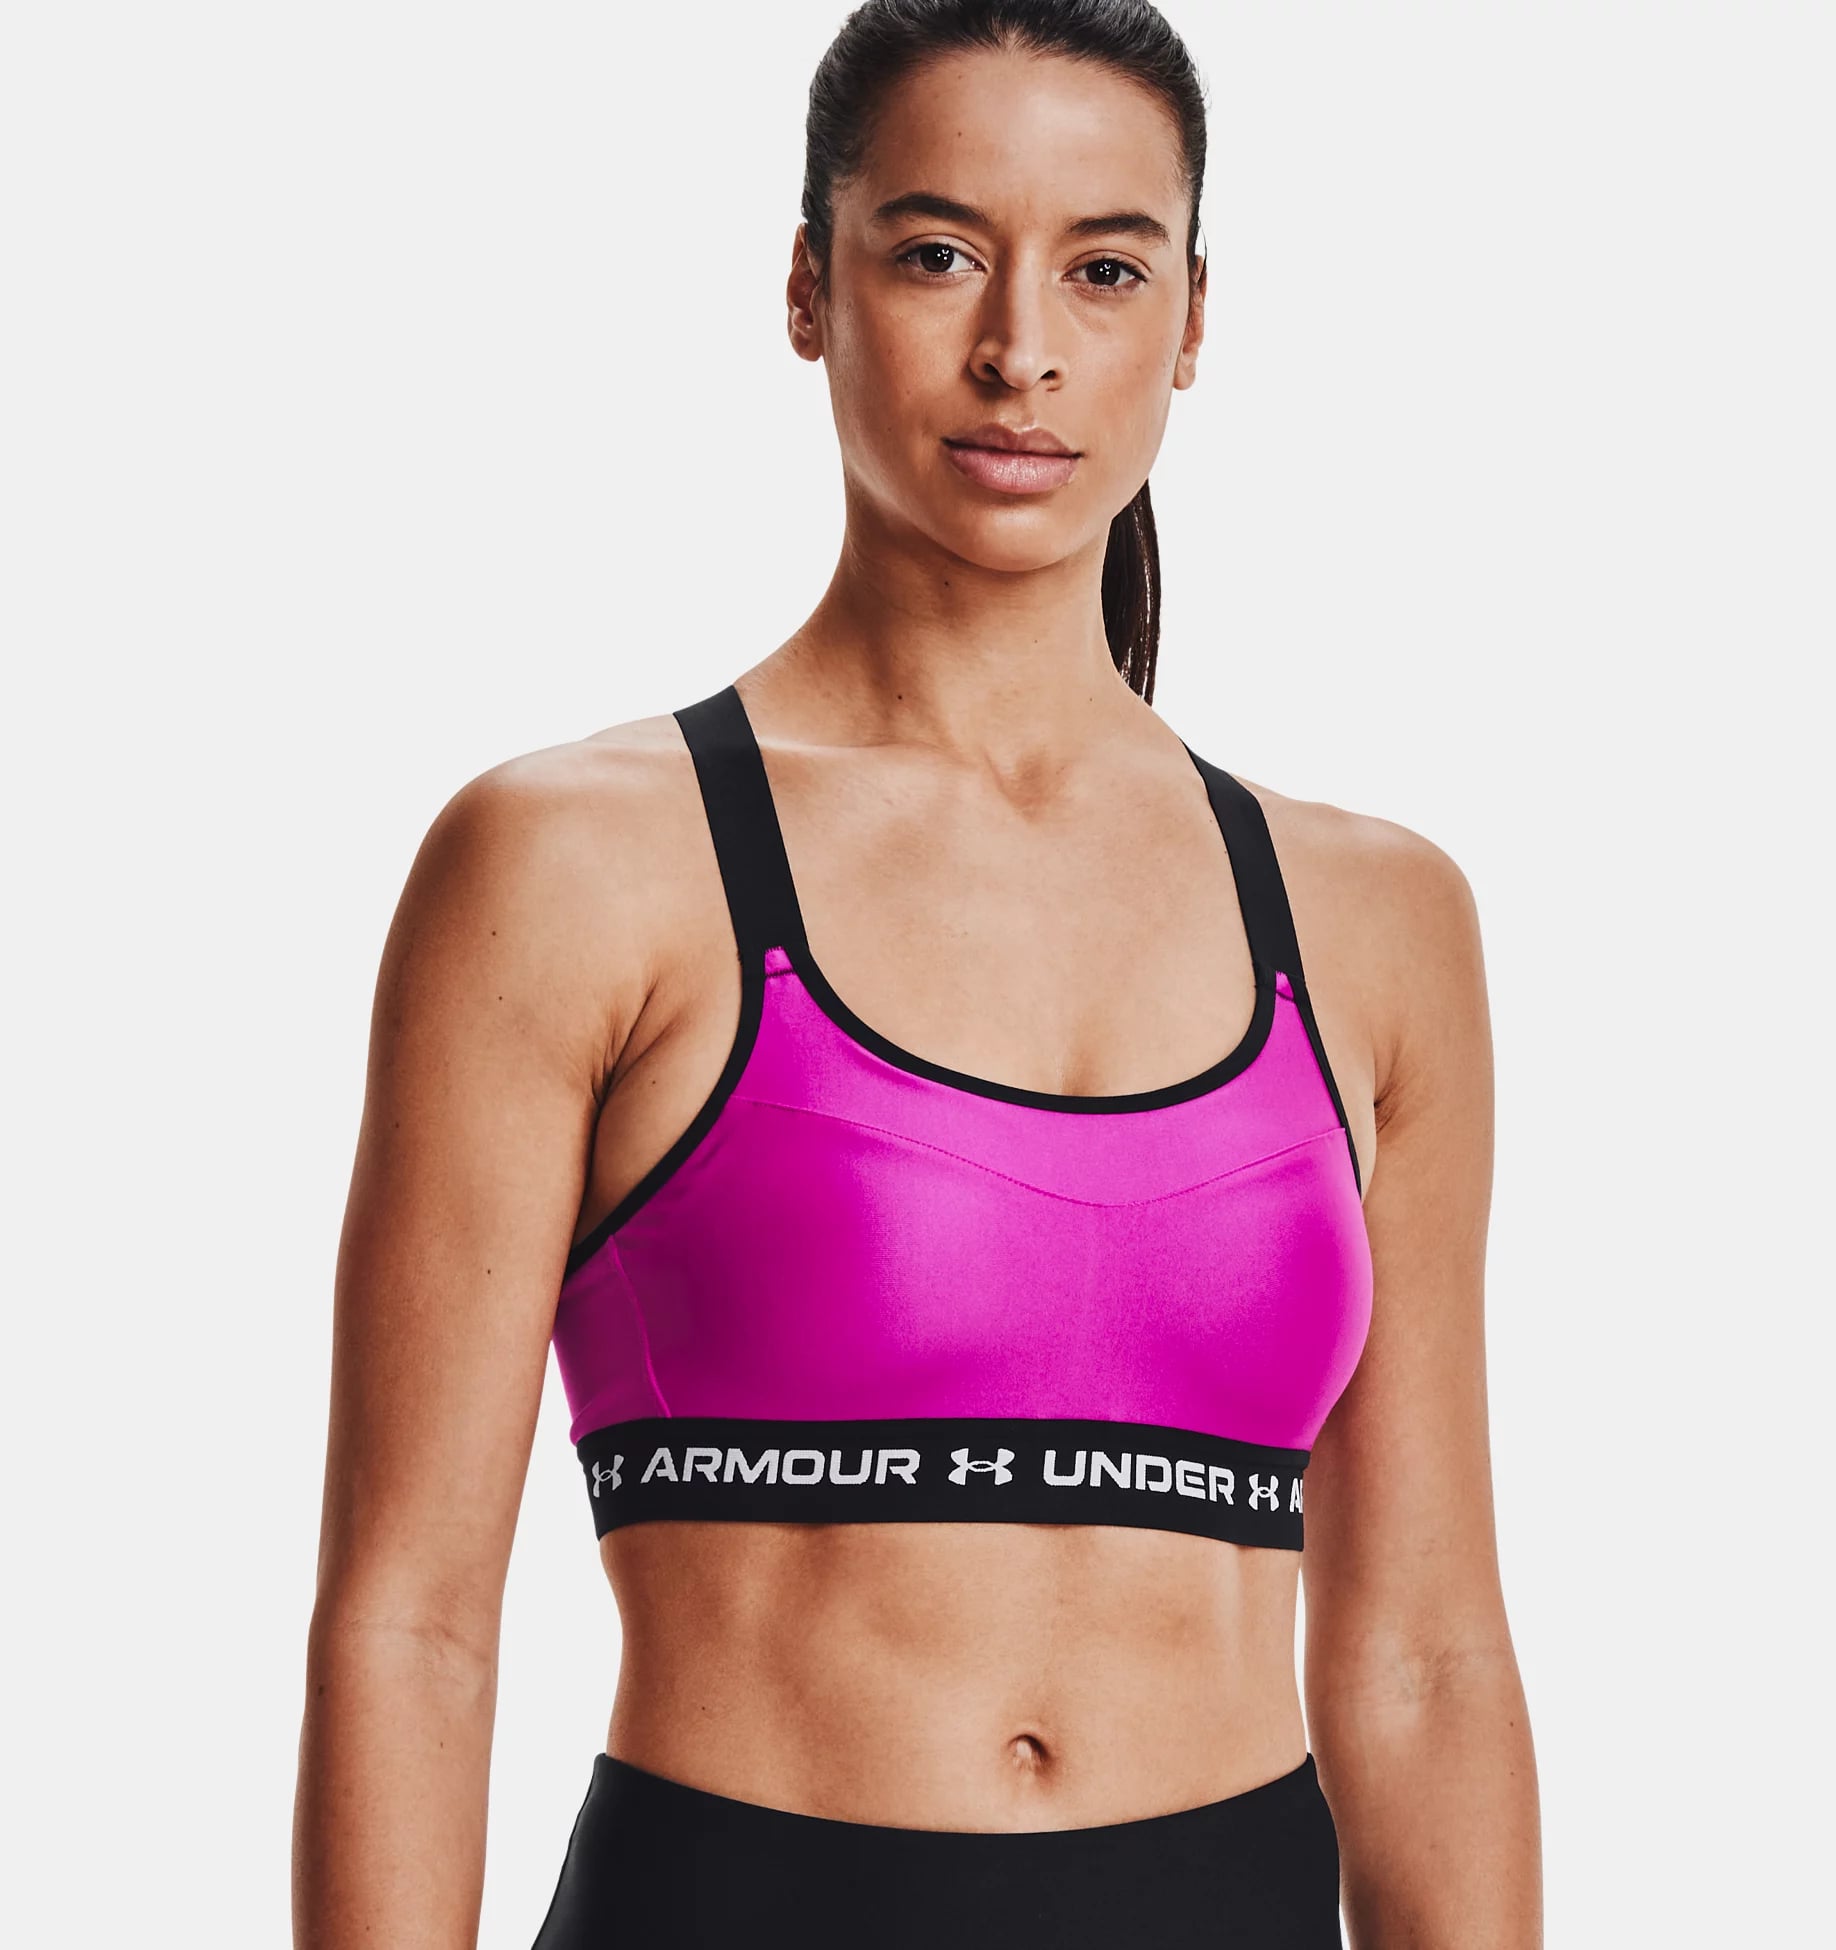 Pink Under Armour Sports Bras & Vests - Brights - Yoga - JD Sports